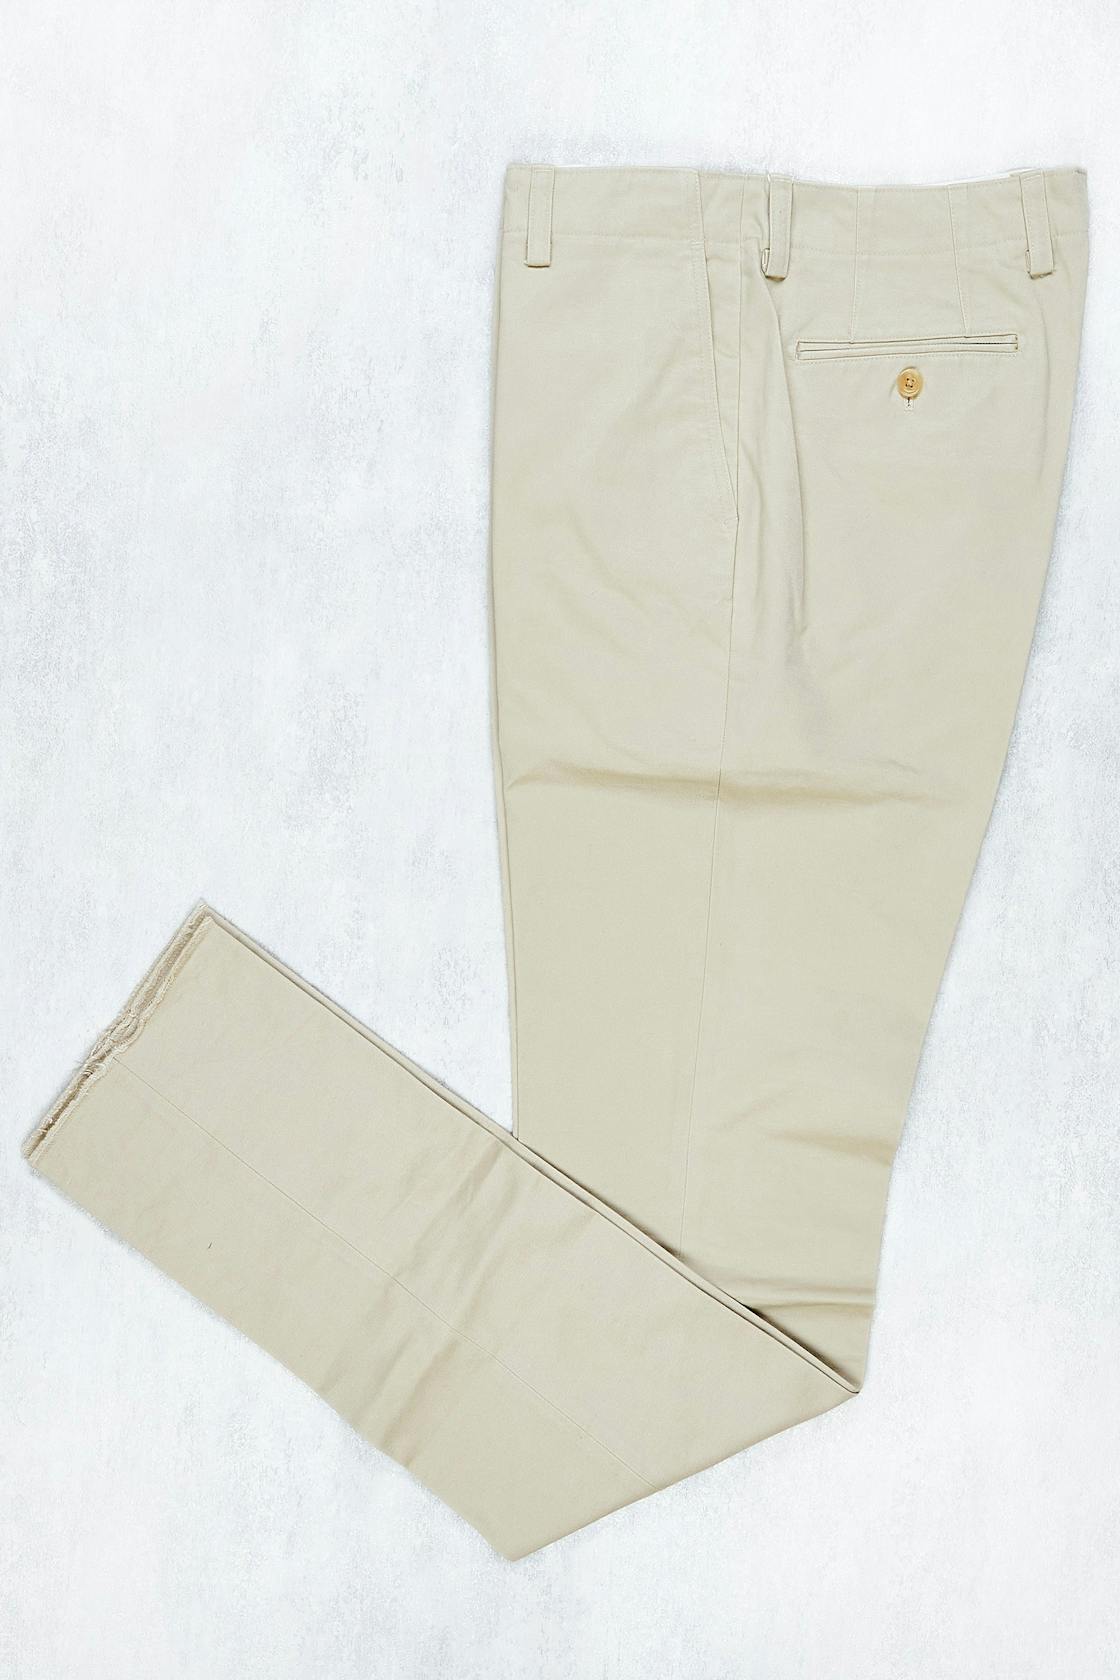 The Armoury by Ring Jacket Model A Stone Cotton Sport Chinos